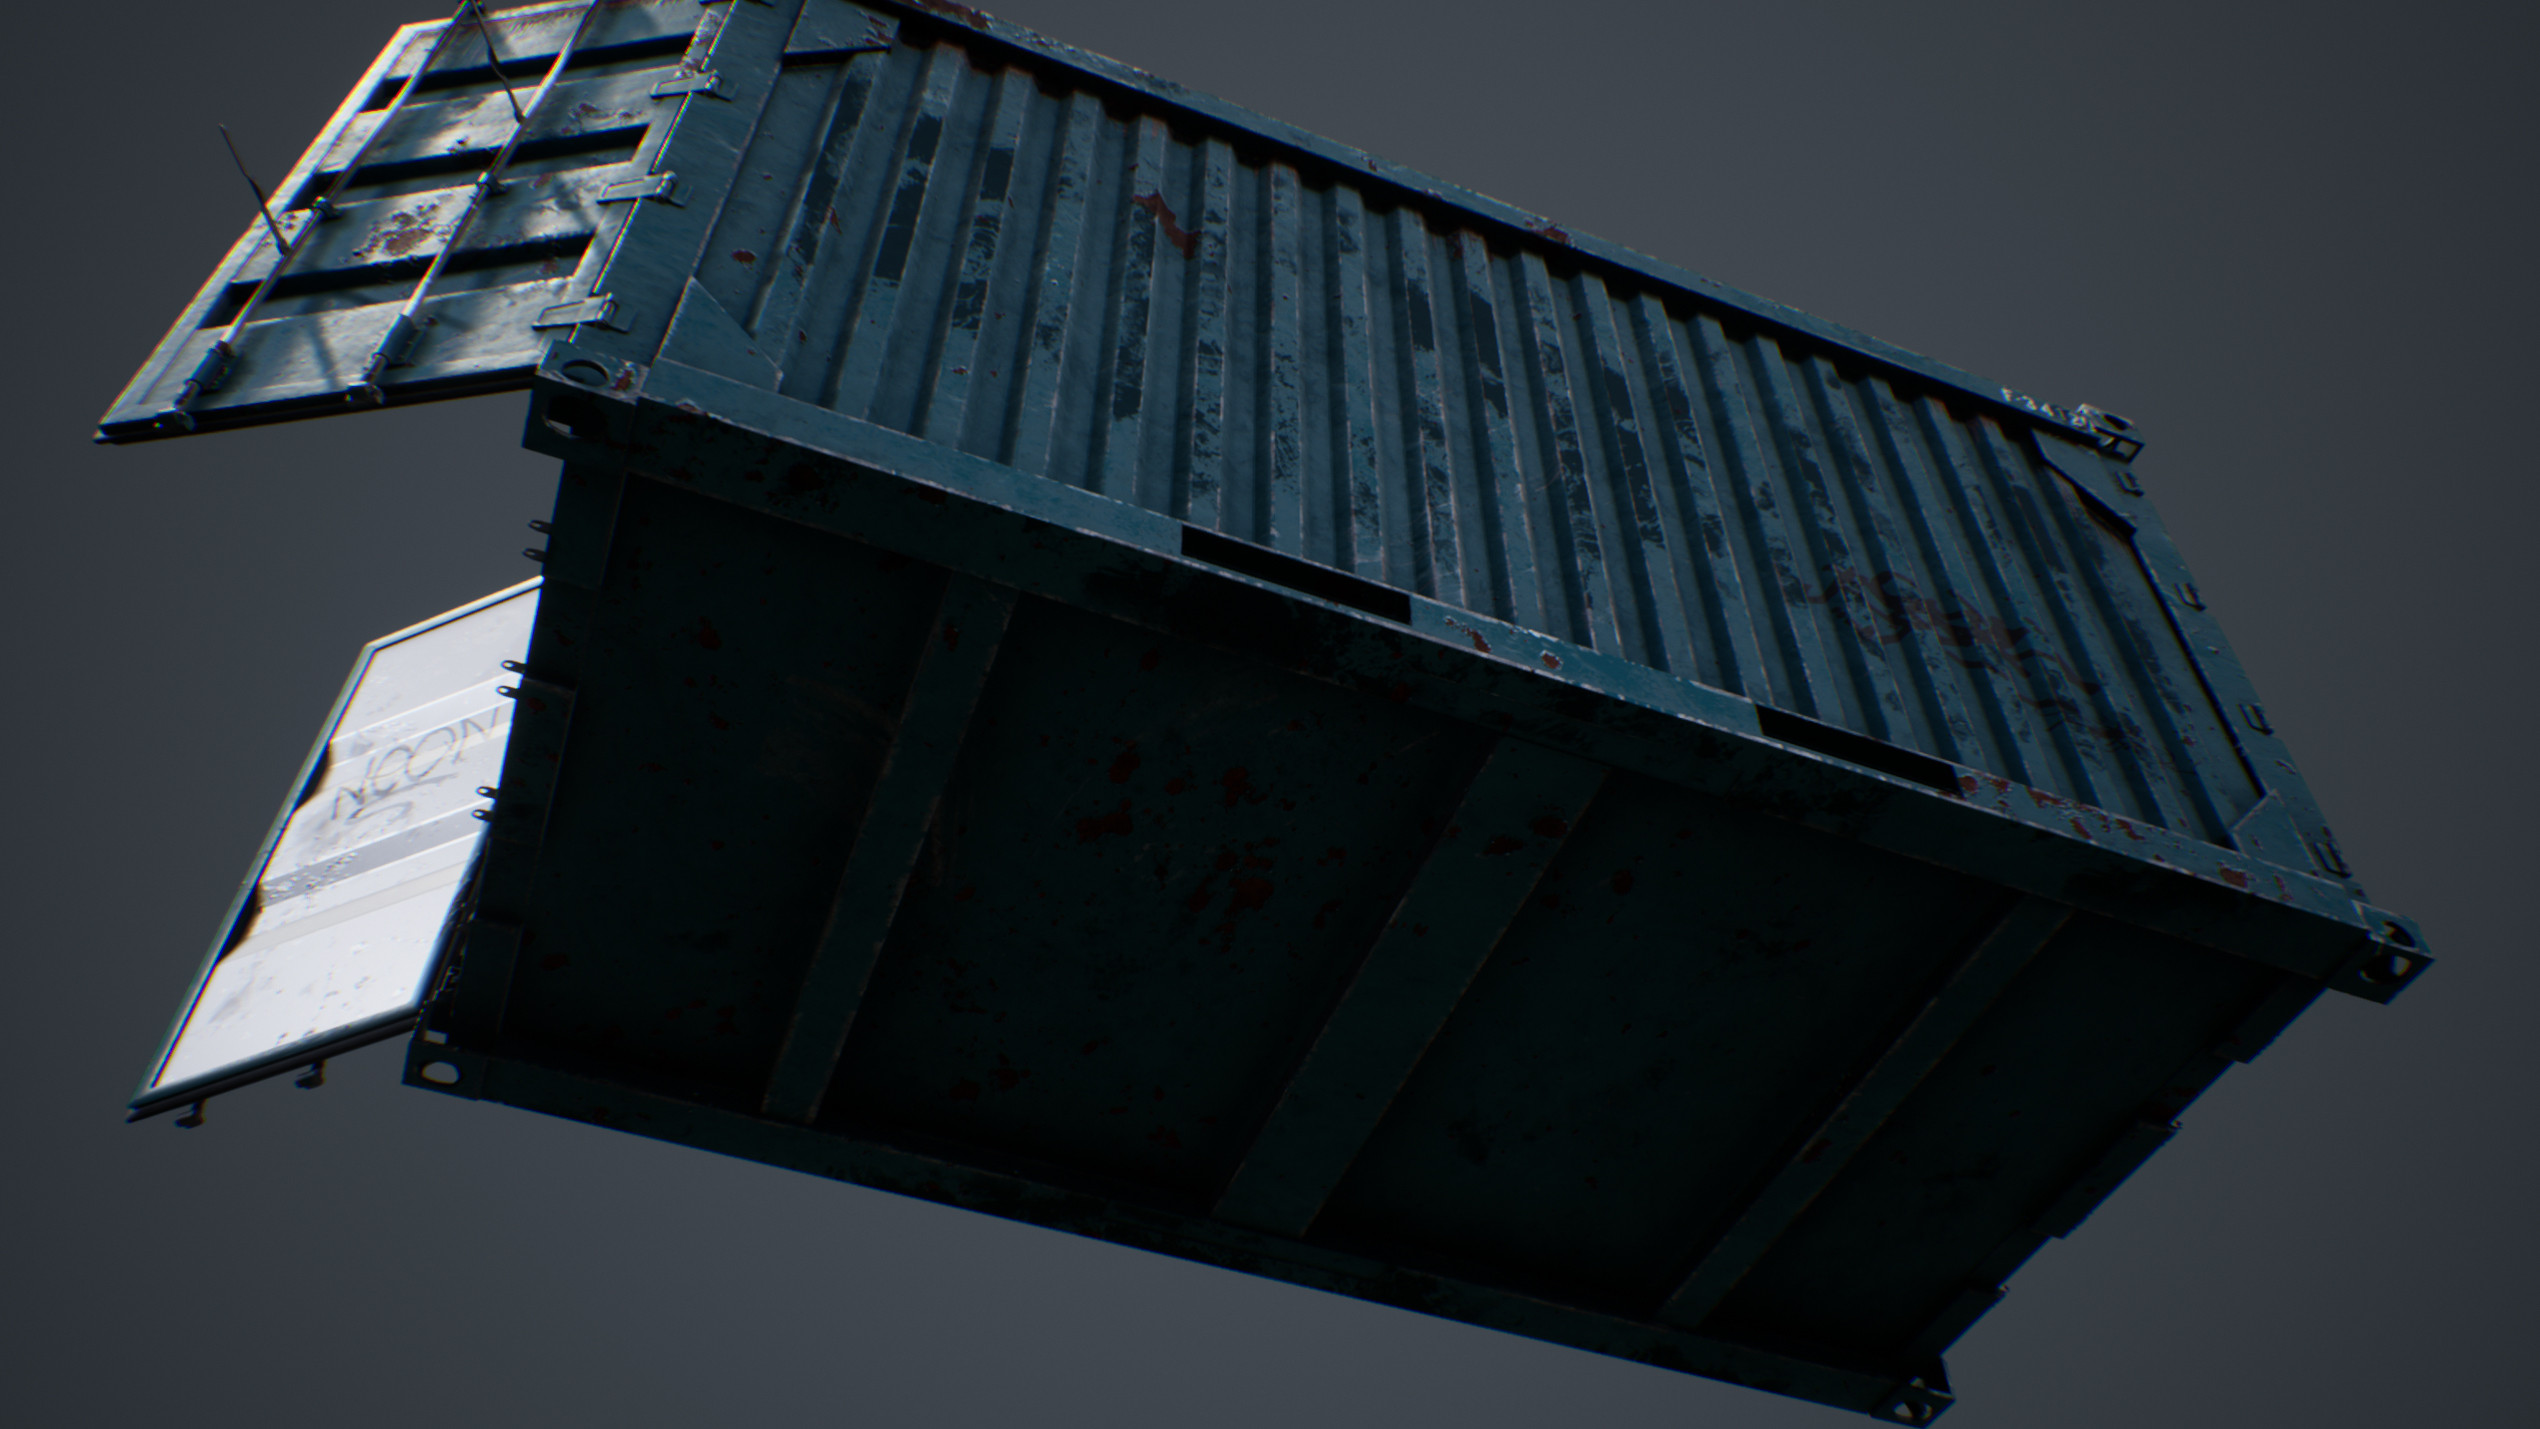 UE4 screenshot bottom up shot of the container.